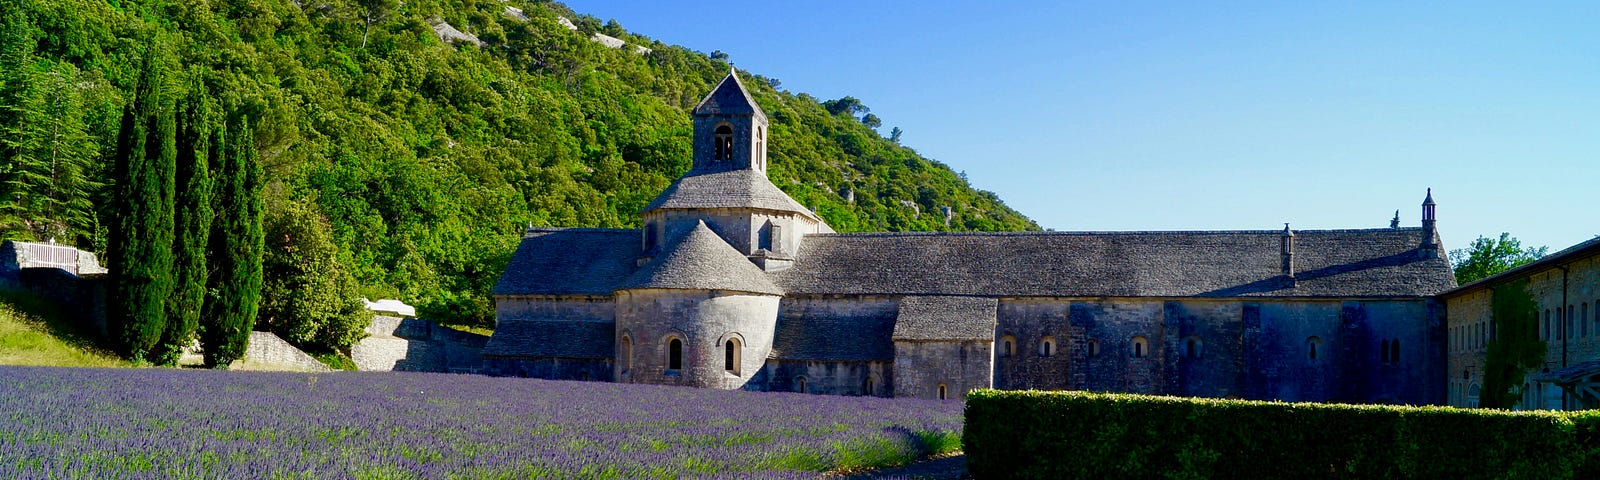 Neat rows of blooming lavender in France which are planted in front of an old stone building known as Senanque Abbey, with a blue sky above, dry dirt in the foreground, and a green and rocky hill sloping downward behind the Abbey.